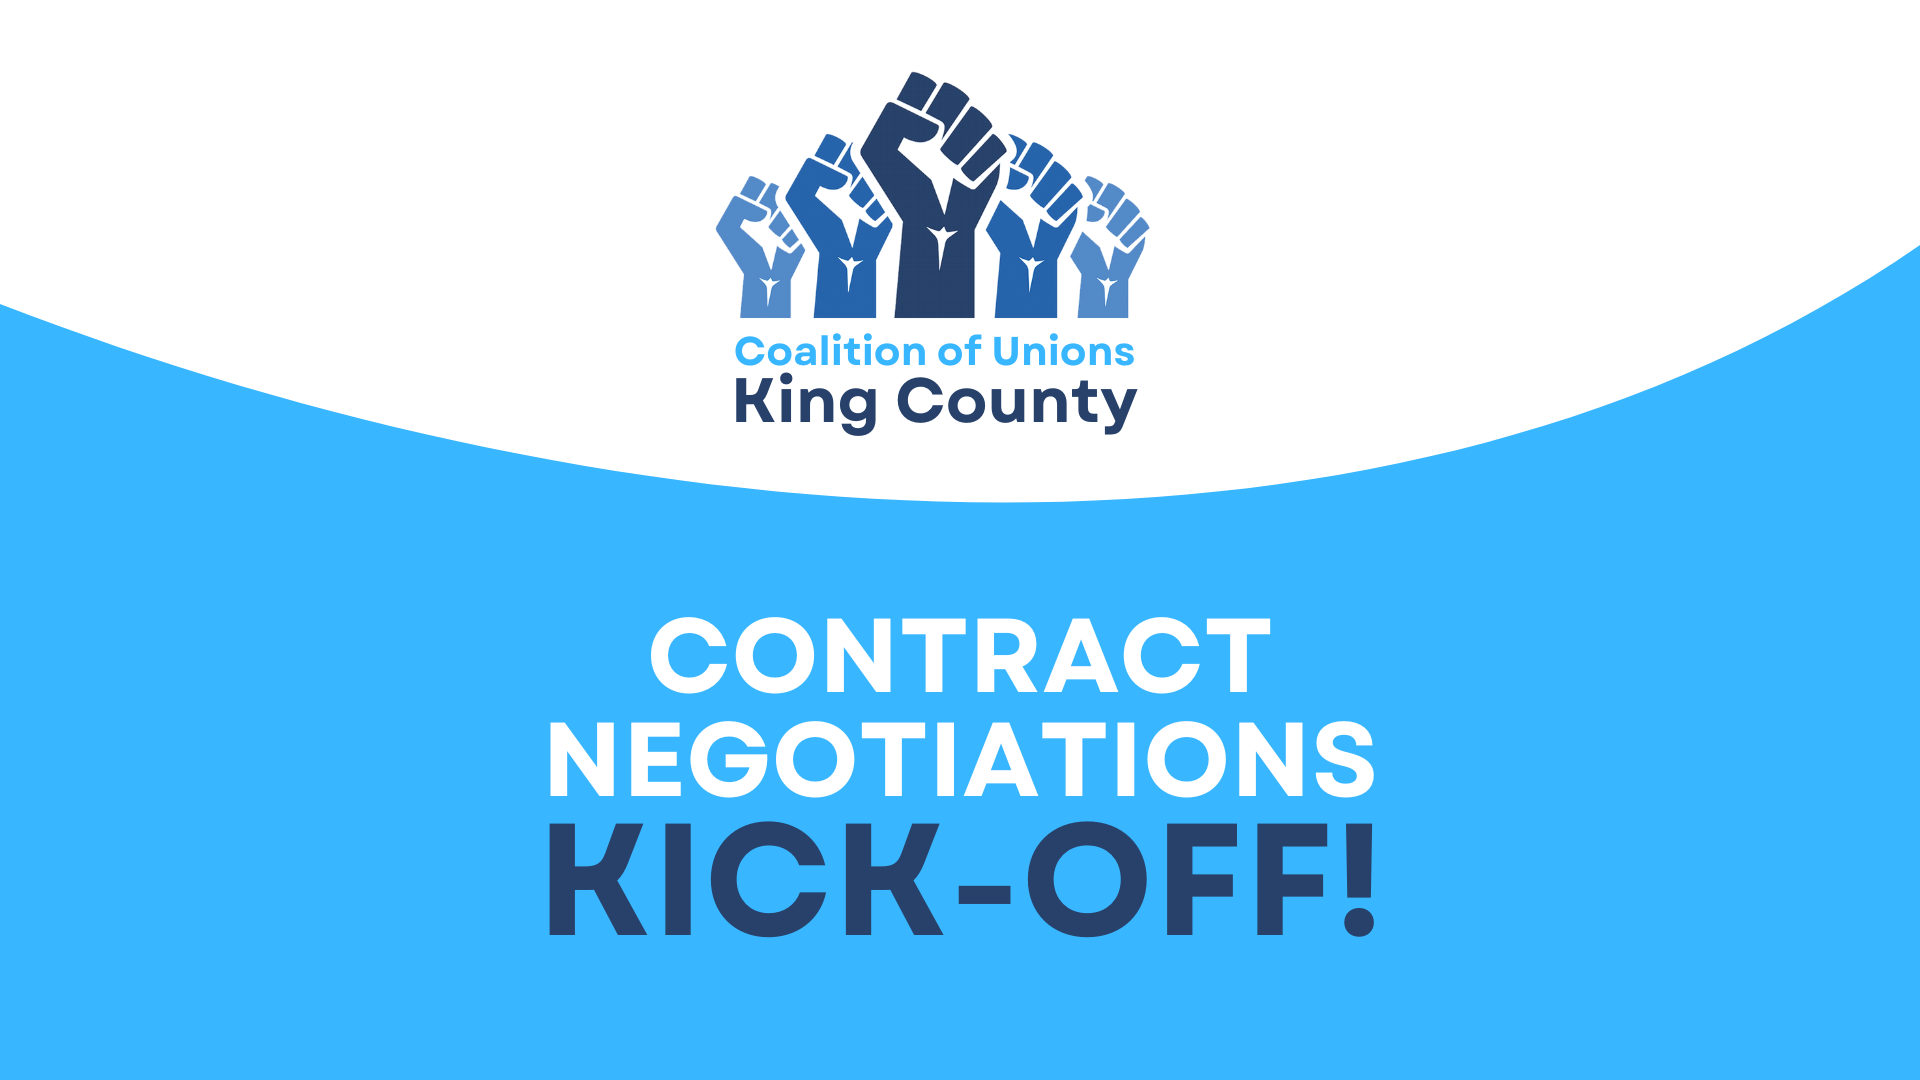 The Coalition of Unions King County logo is at the top: a graphic of five fists raised in solidarity, in varying shades of blue, with the words, "Coalition of Unions King County." There is a blue curved shape that comes up from the bottom. The words over the blue reads, "CONTRACT NEGOTIATIONS KICK-OFF!"